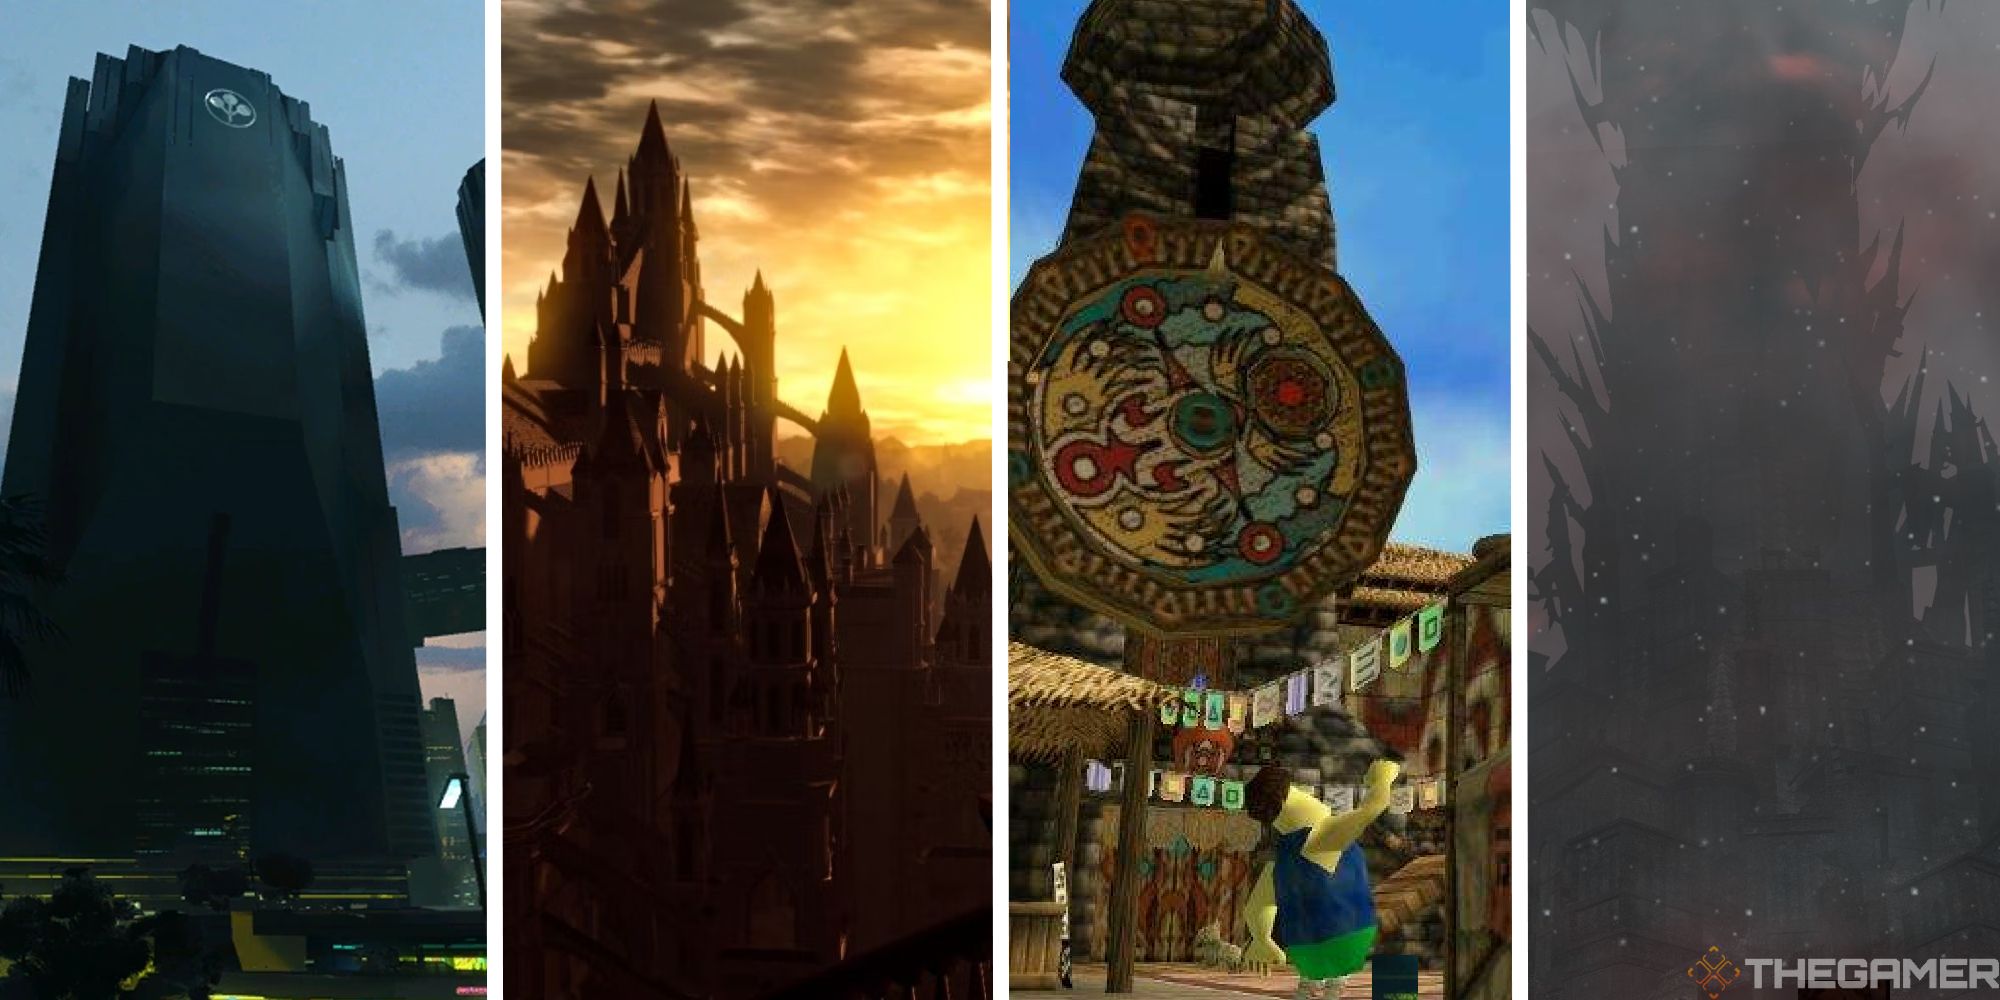 split image showing arasaka tower, anor londo, termina's clock tower, and the tower of babil